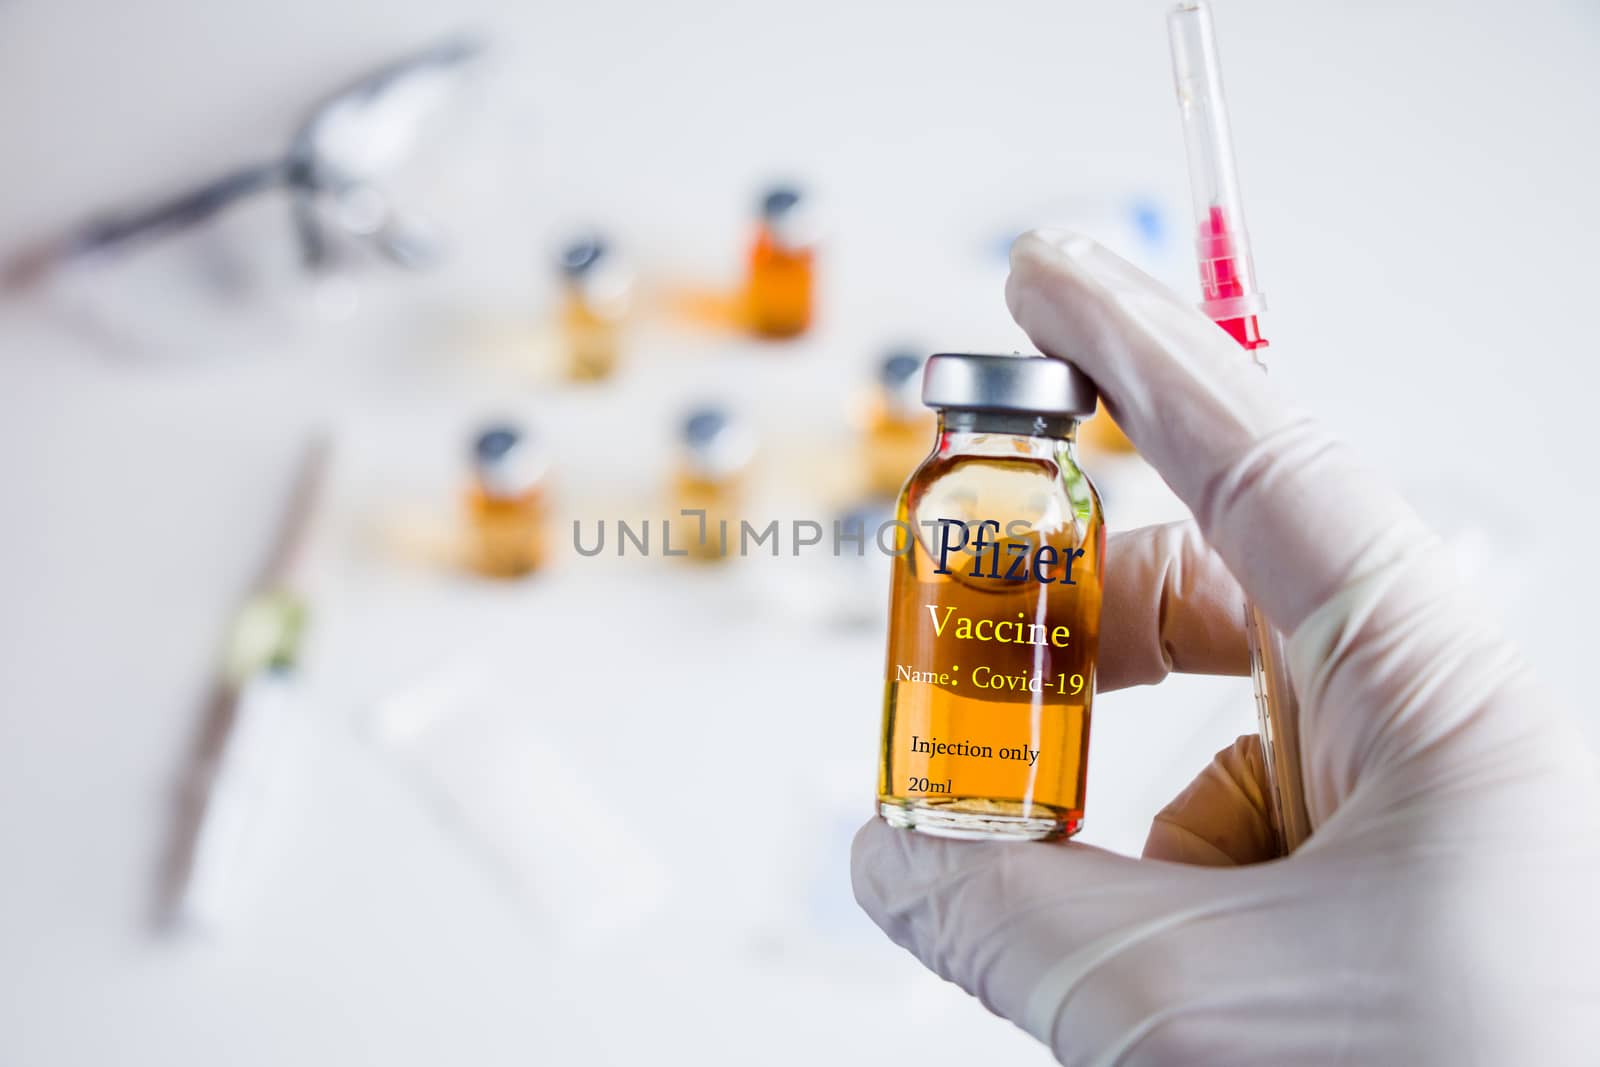 Pfizer Corona virus and Covid - 19 new vaccine in ampules and bottles, needle and doctors hand. by Taidundua